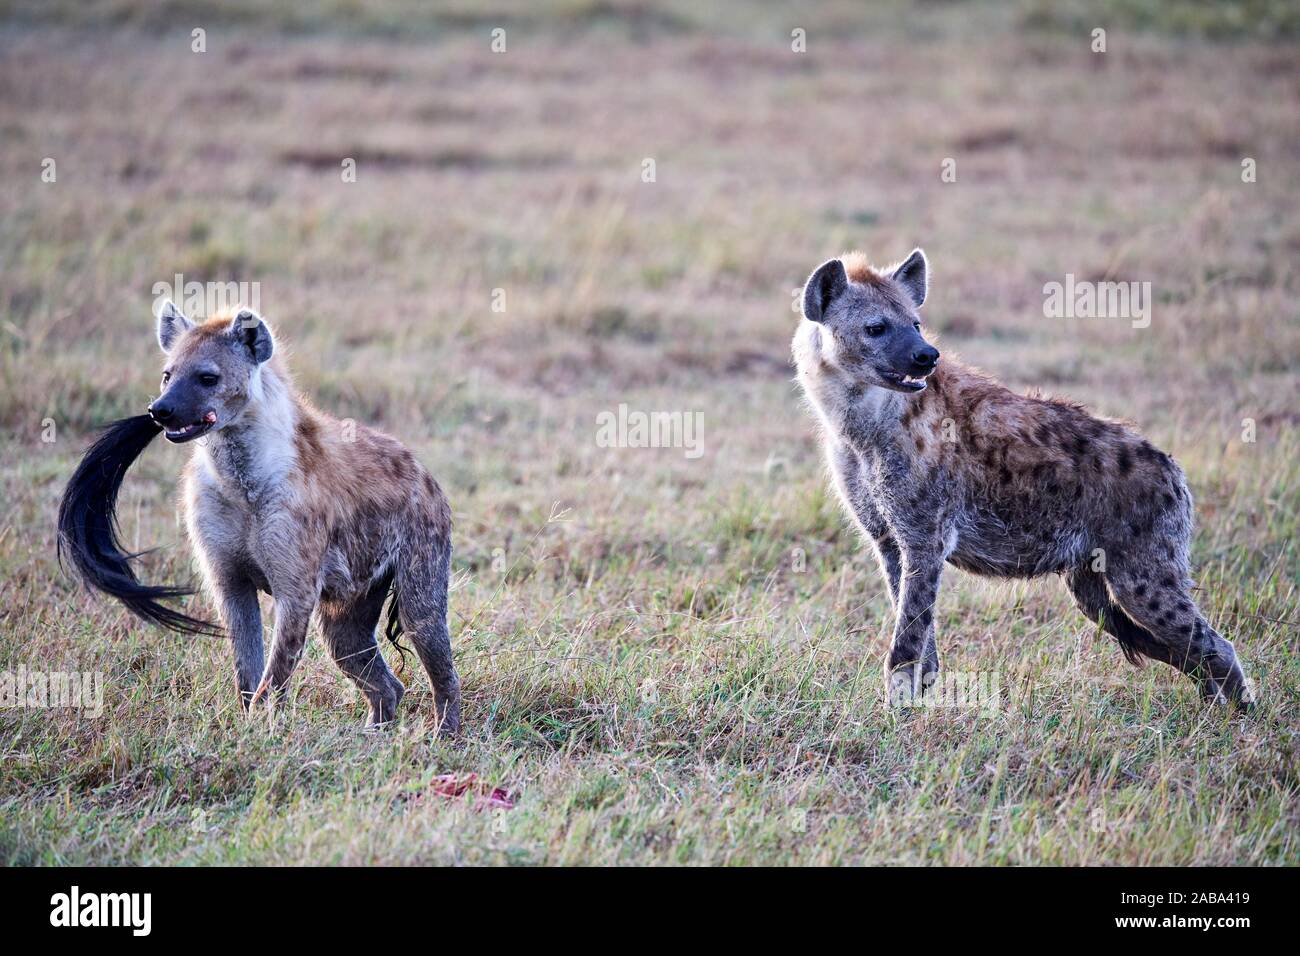 Two Spotted hyaena (Crocuta crocuta) in savanna and one with a wildebeest tail in its mouth. Masai Mara National Reserve, Kenya. Stock Photo